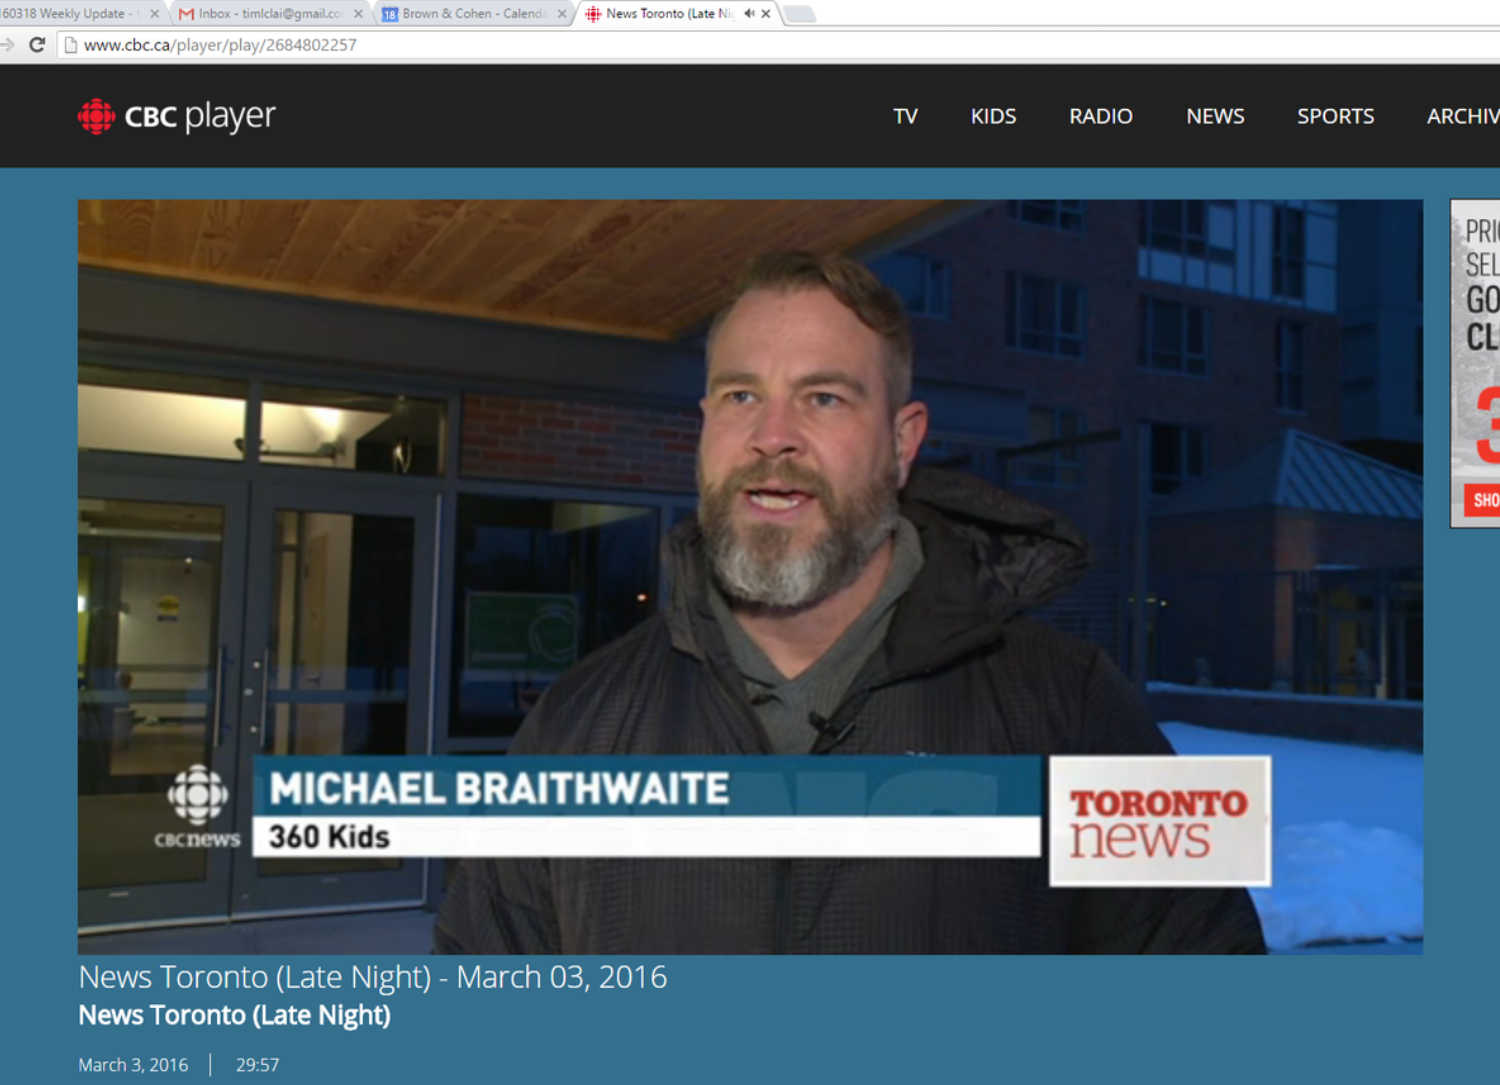 <b>CBC NEWS TORONTO:</b> REPORTER NICK BOISVERT COVERED THE LAUNCH OF THE  360º EXPERIENCE, HIGHLIGHTING THE SCENARIOS PRESENTED TO COMMUNITY LEADERS AND INTERVIEWED EXECUTIVE DIRECTOR MICHAEL BRAITHWAITE AND 360º KIDS SUCCESS STORY, AMANDA. THIS WAS THE SECOND STORY OF THE NEWSCAST.